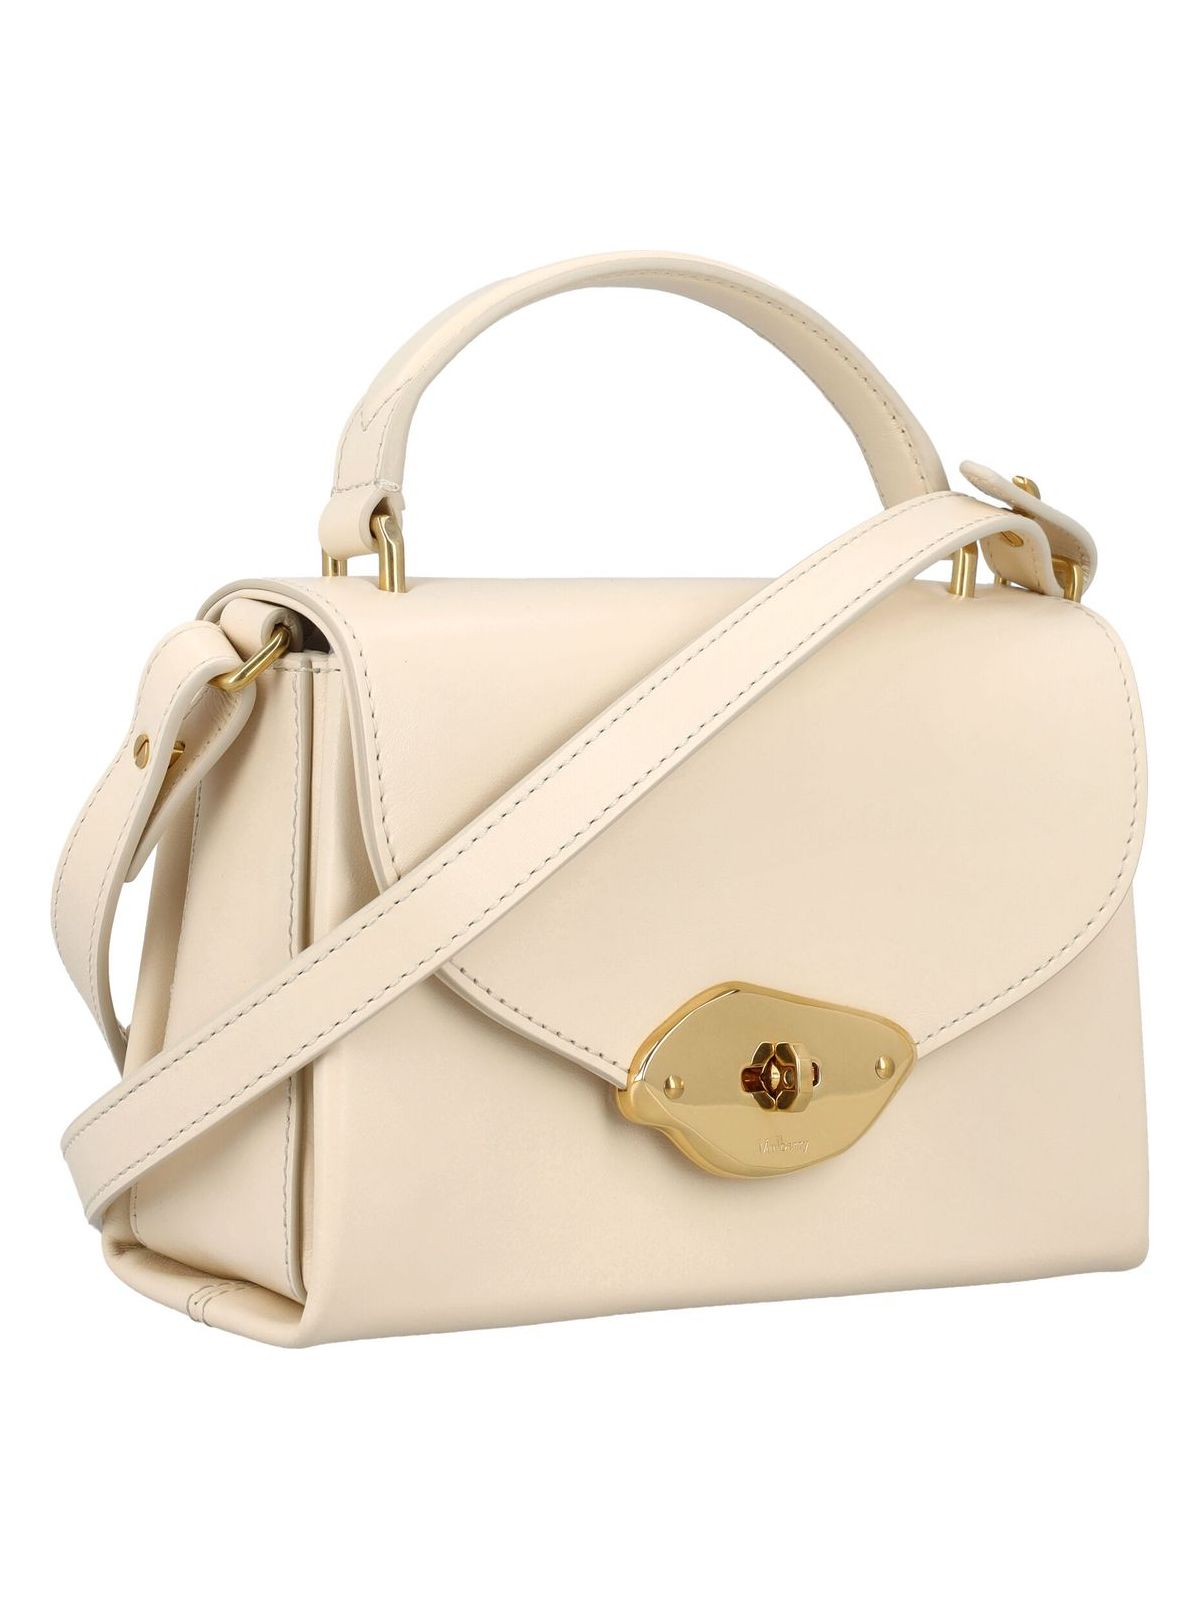 H687 MULBERRY SMALL LANA TOP HANDLE